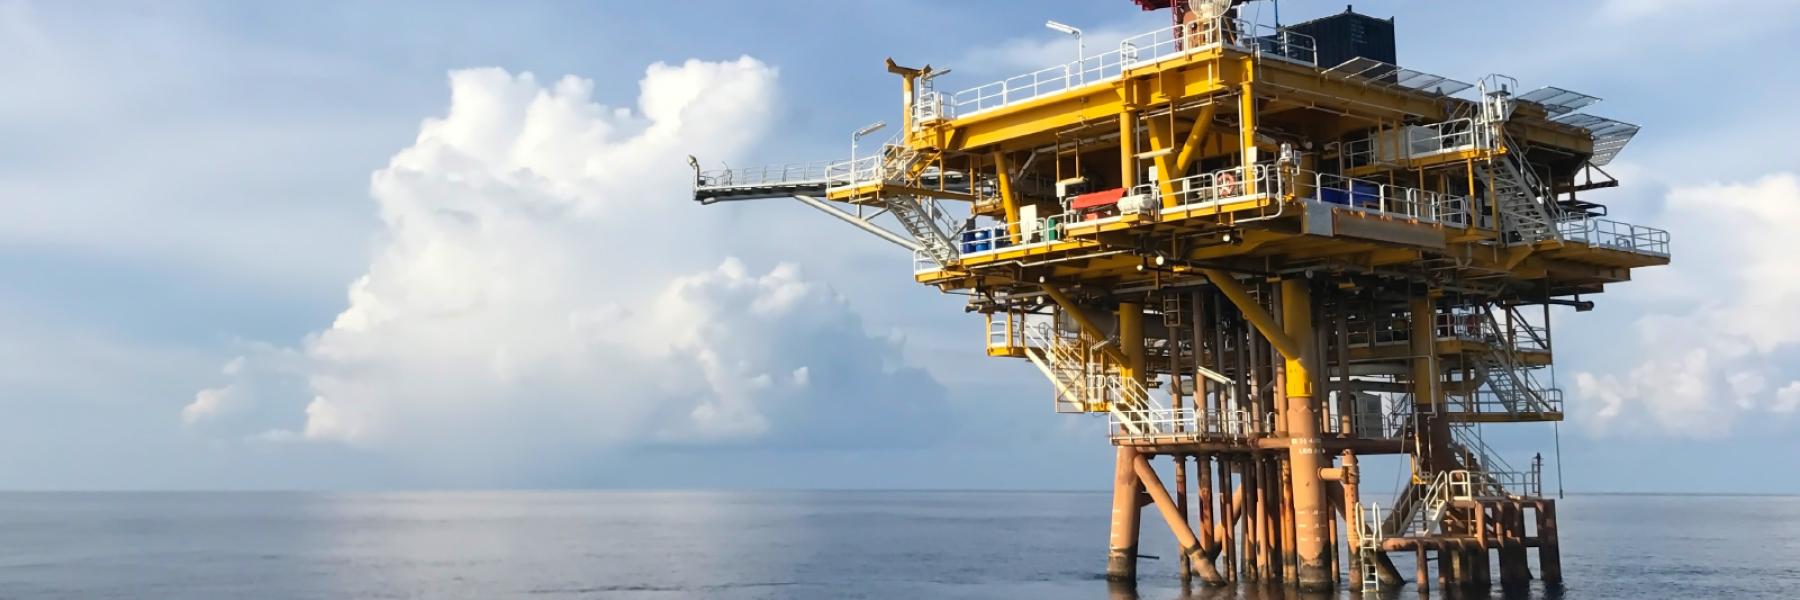 an oil rig out in the ocean with blue sky and white clouds in the background